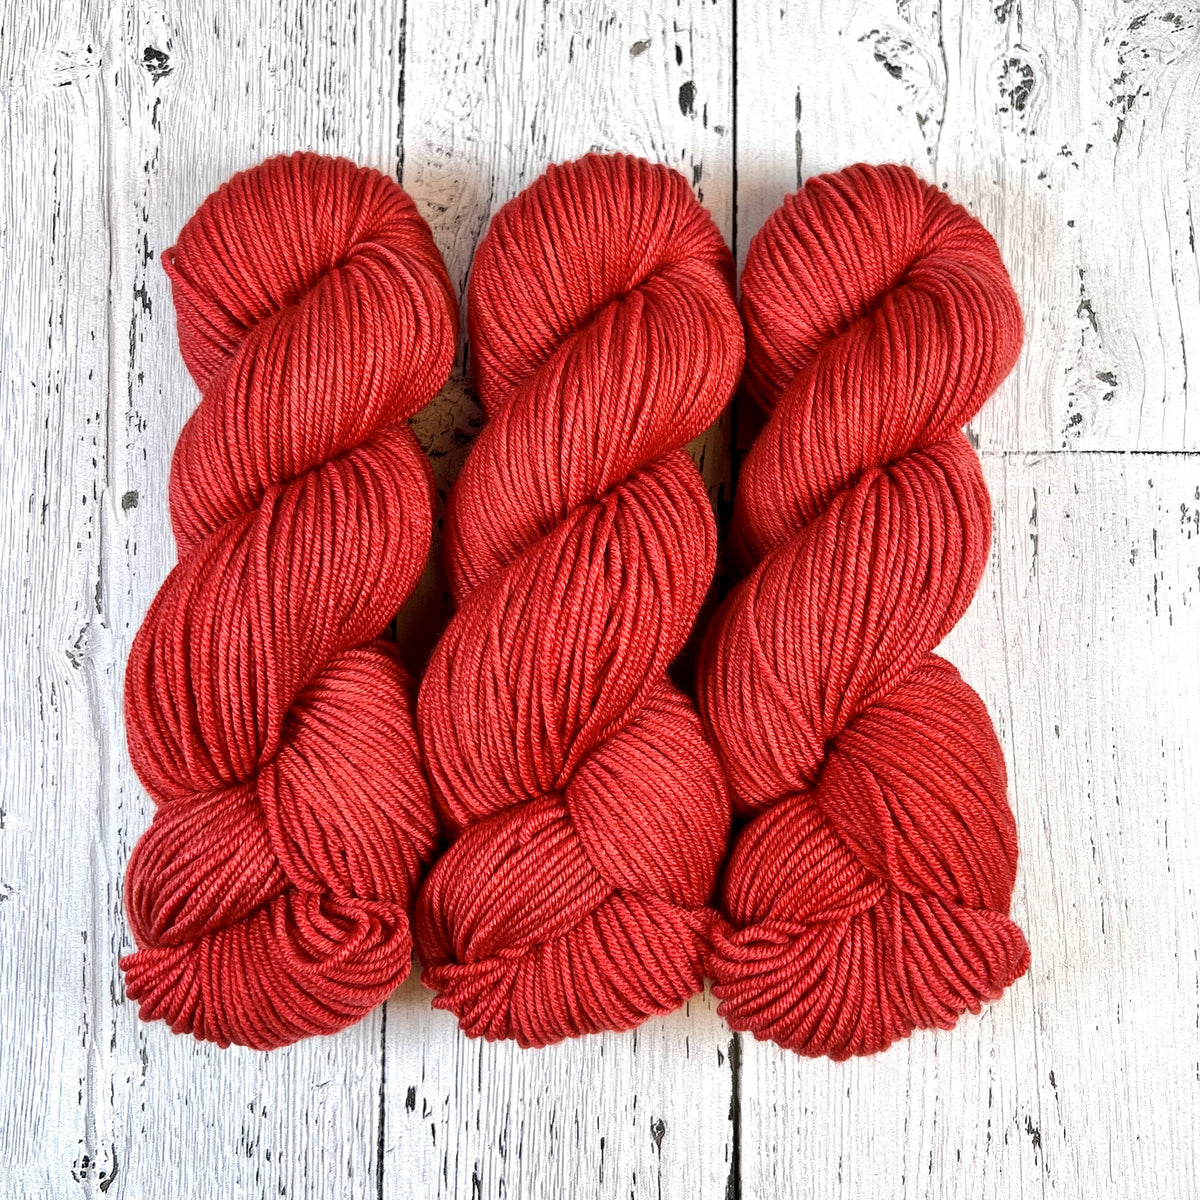 Hearthside - Fioritura Worsted - Dyed Stock